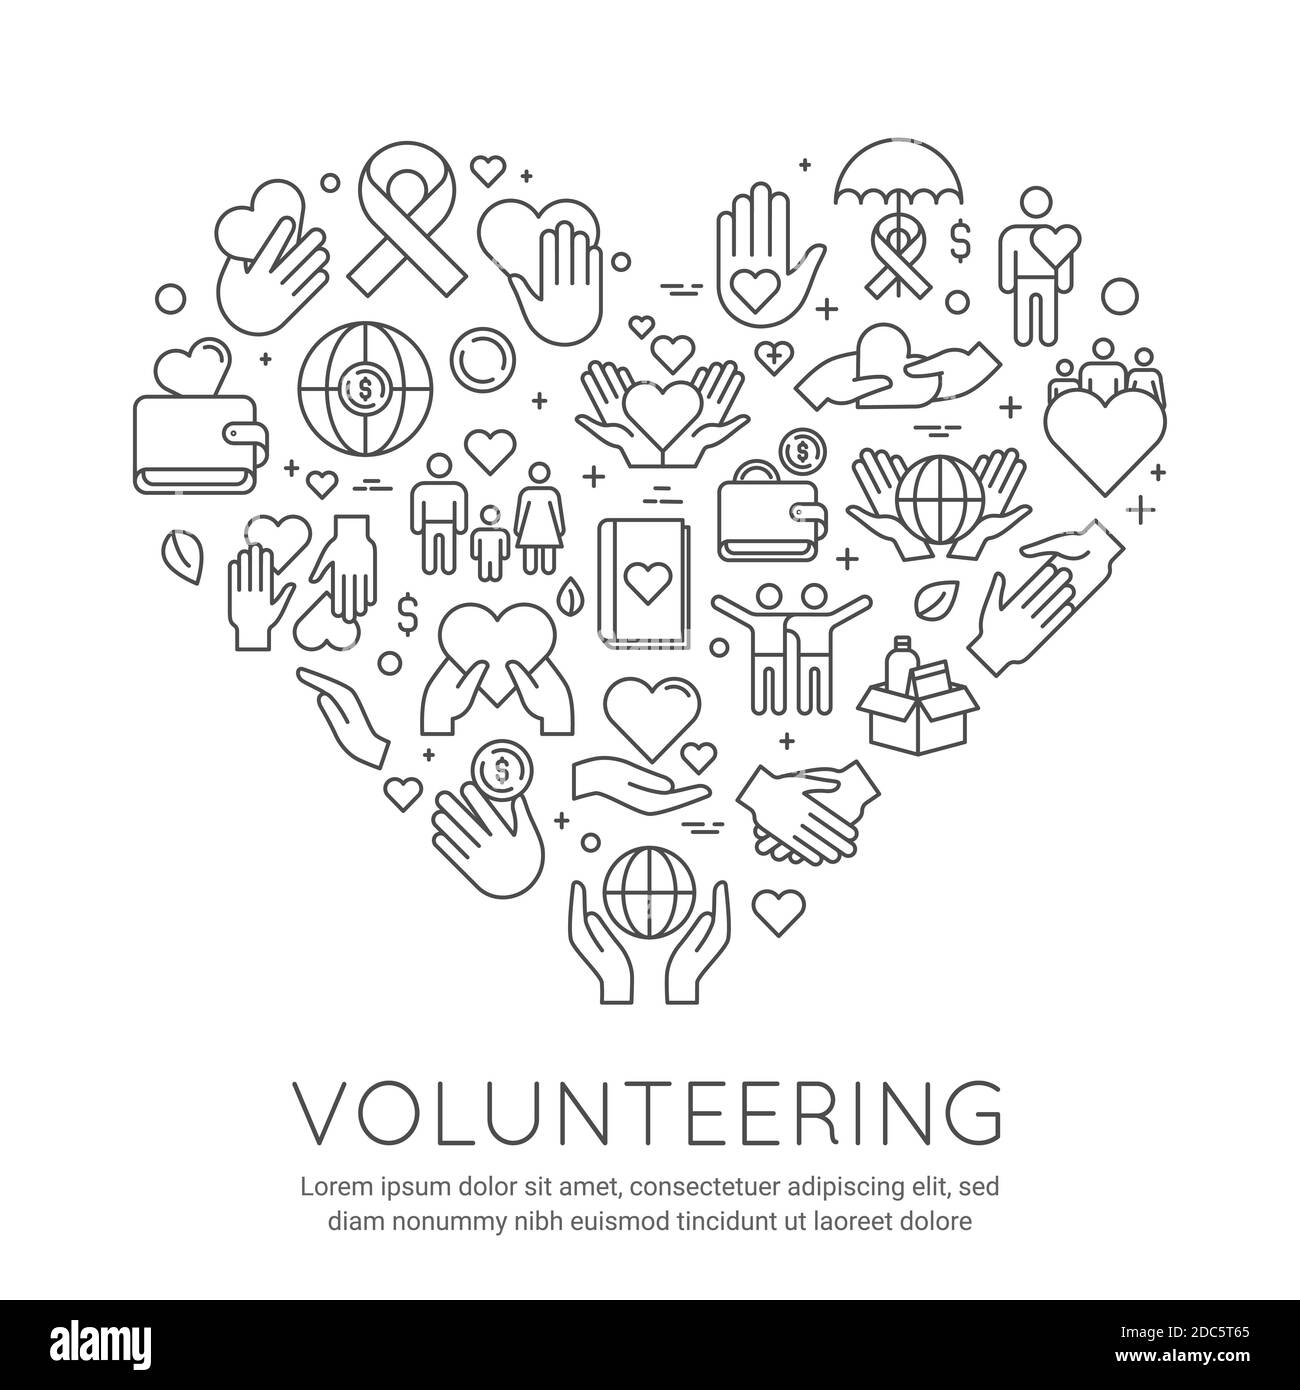 Volunteer line poster. Charity and donation banner, heart shaped icons. Social care voluntary work. Activity helping people, vector concept Stock Vector